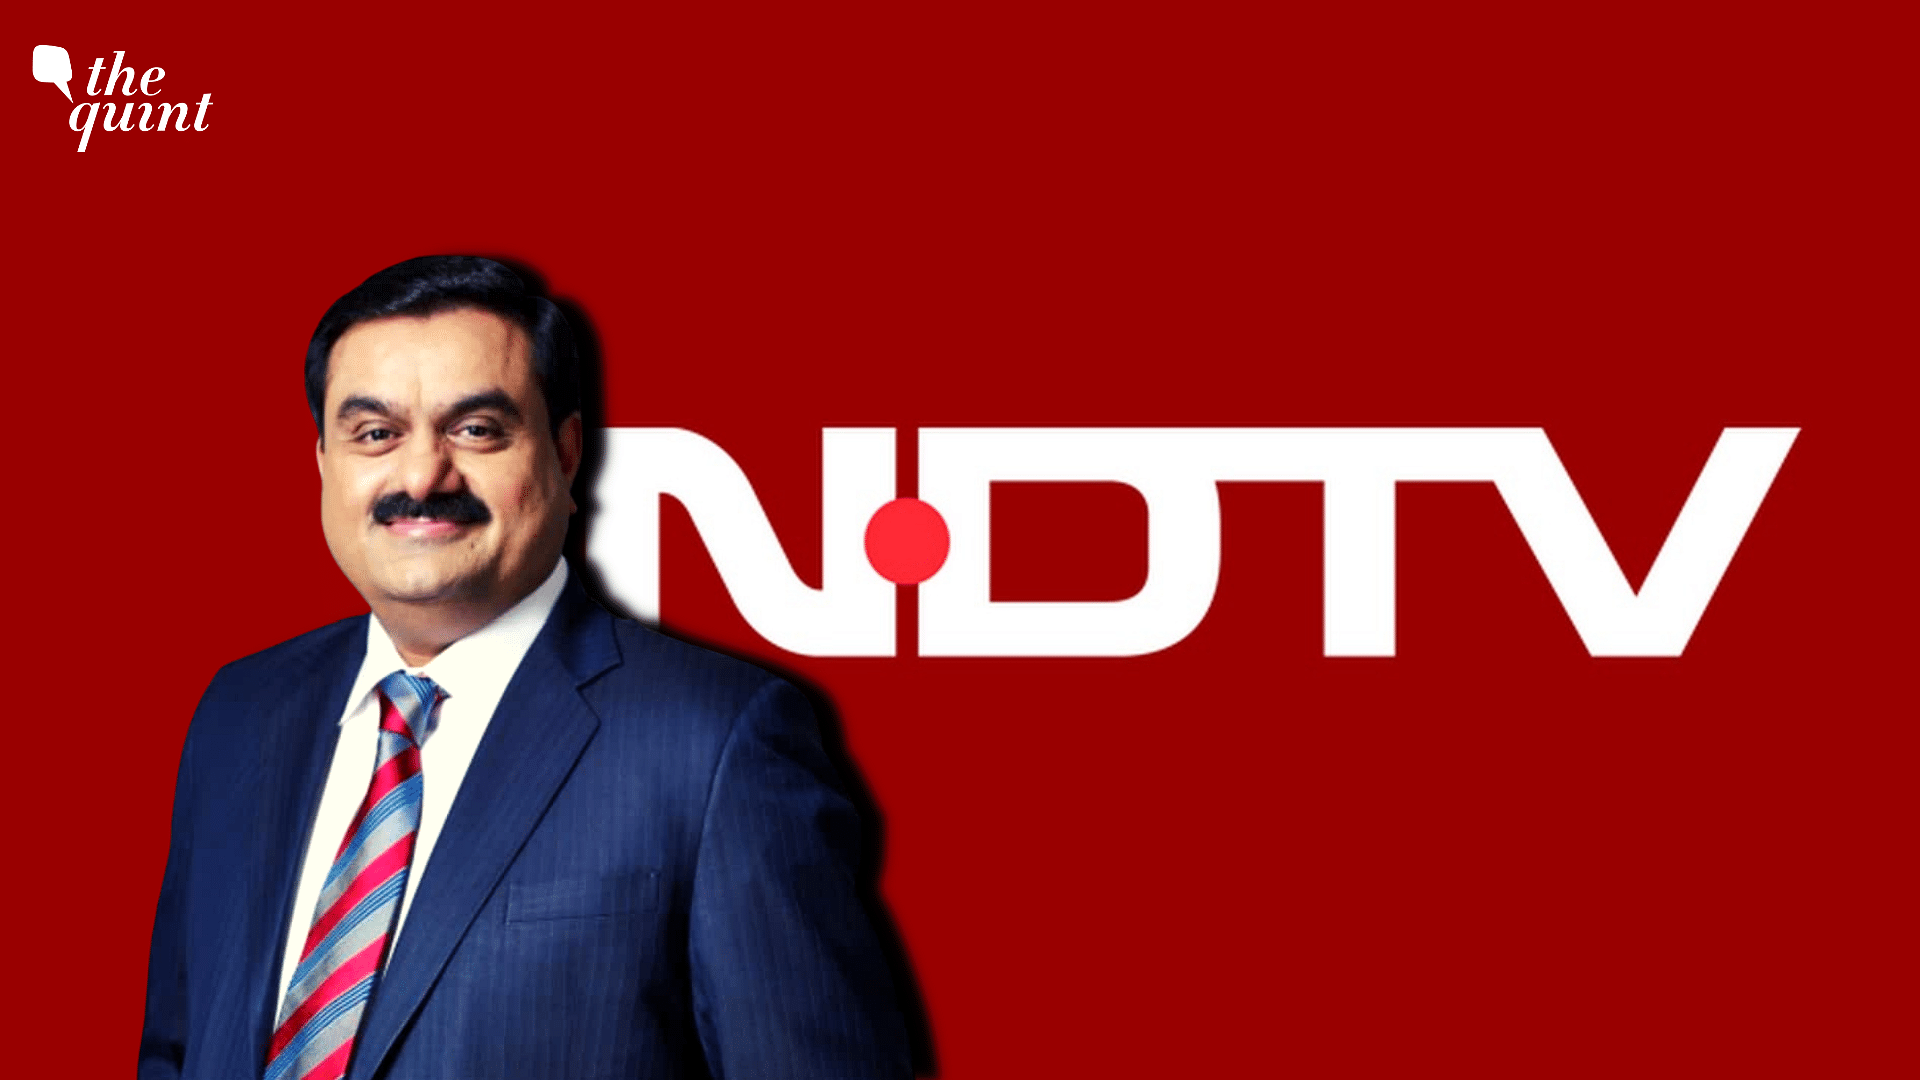 <div class="paragraphs"><p>Billionaire&nbsp;<a href="https://www.thequint.com/topic/gautam-adani">Gautam Adani</a>'s takeover of news channel&nbsp;<a href="https://www.thequint.com/topic/ndtv">NDTV</a>&nbsp;has been completed, as per a statement by founders Radhika and Prannoy Roy on 23 December.</p></div>